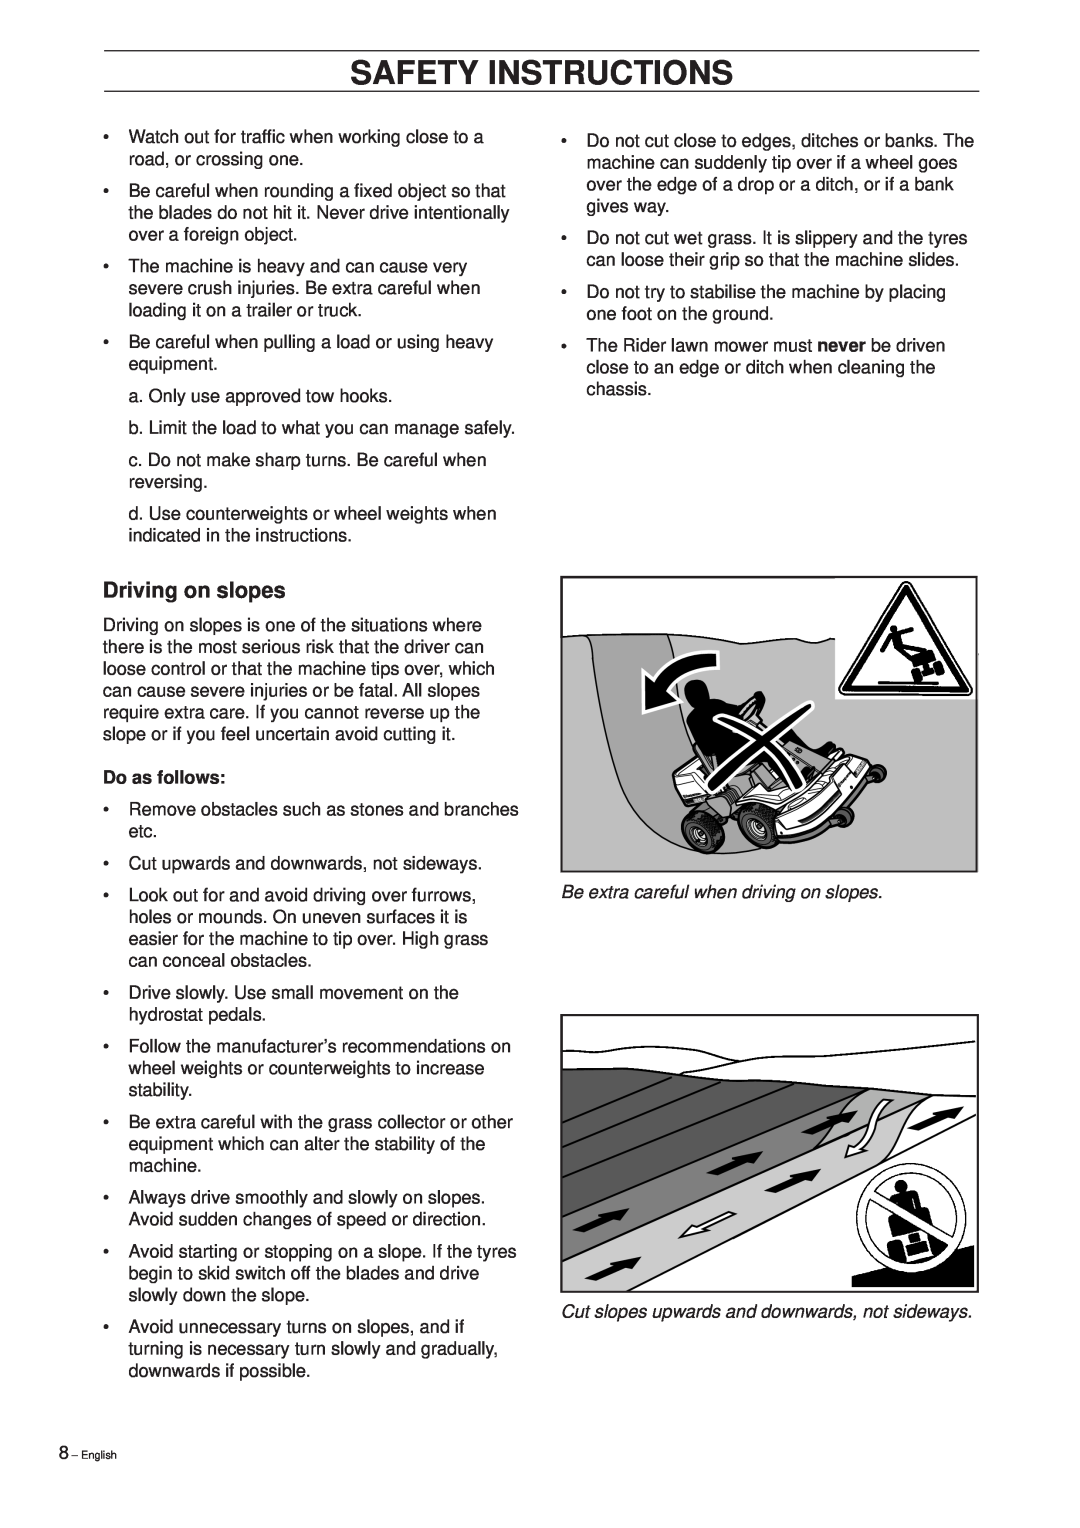 Husqvarna Pro 15 manual Driving on slopes, Do as follows, Be extra careful when driving on slopes, Safety Instructions 